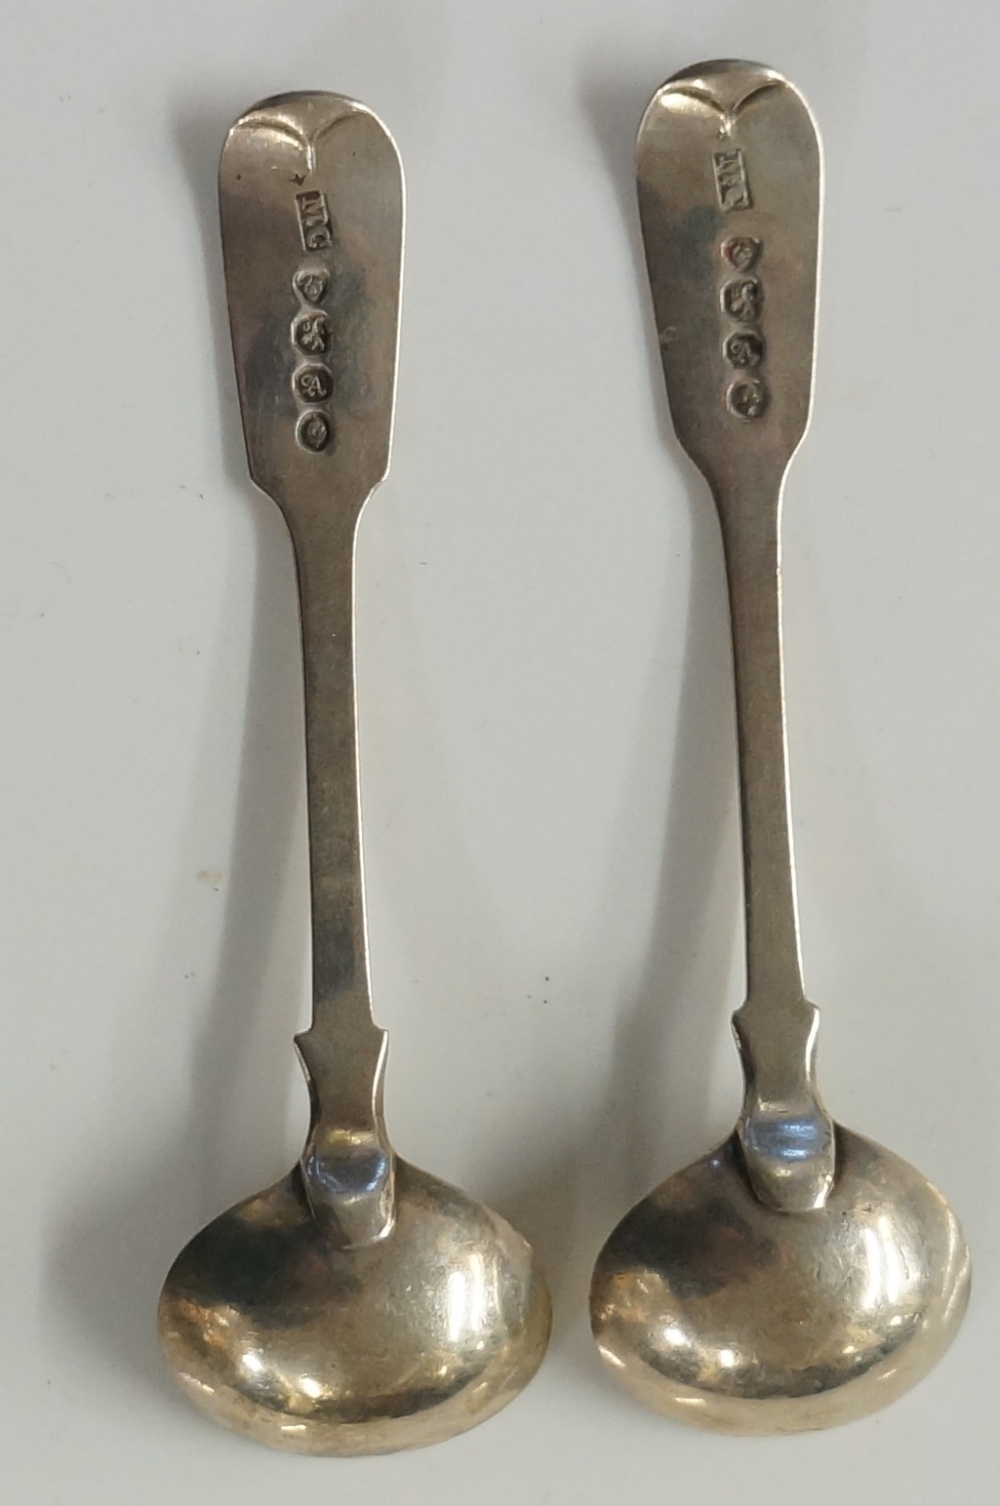 A pair of William IV fiddle pattern mustard spoons with gilded bowls, by Mary Chawner, London 1836, - Image 2 of 2